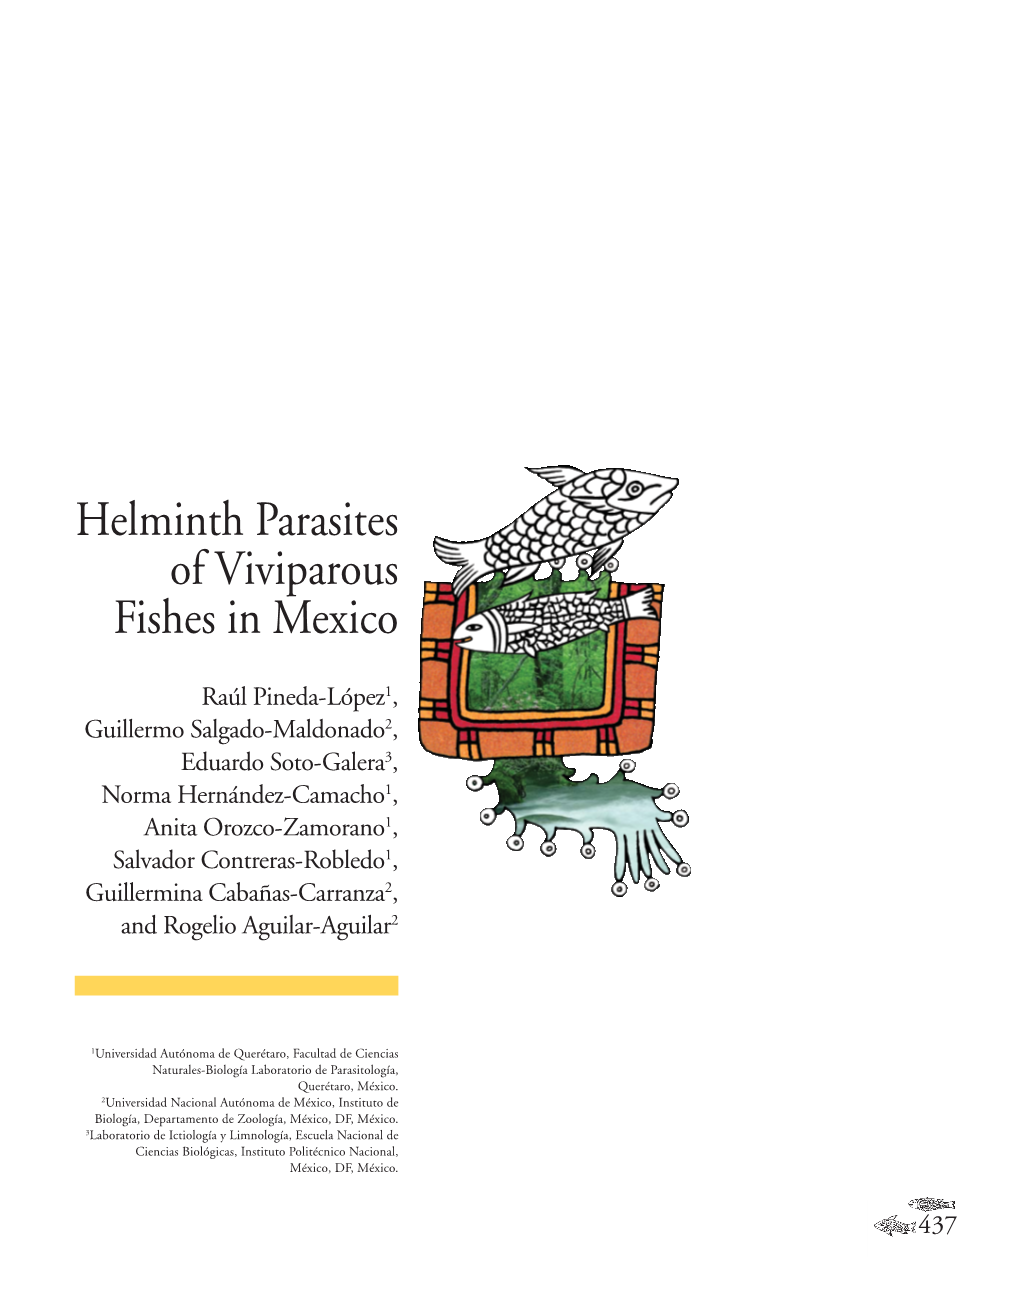 Helminth Parasites of Viviparous Fishes in Mexico